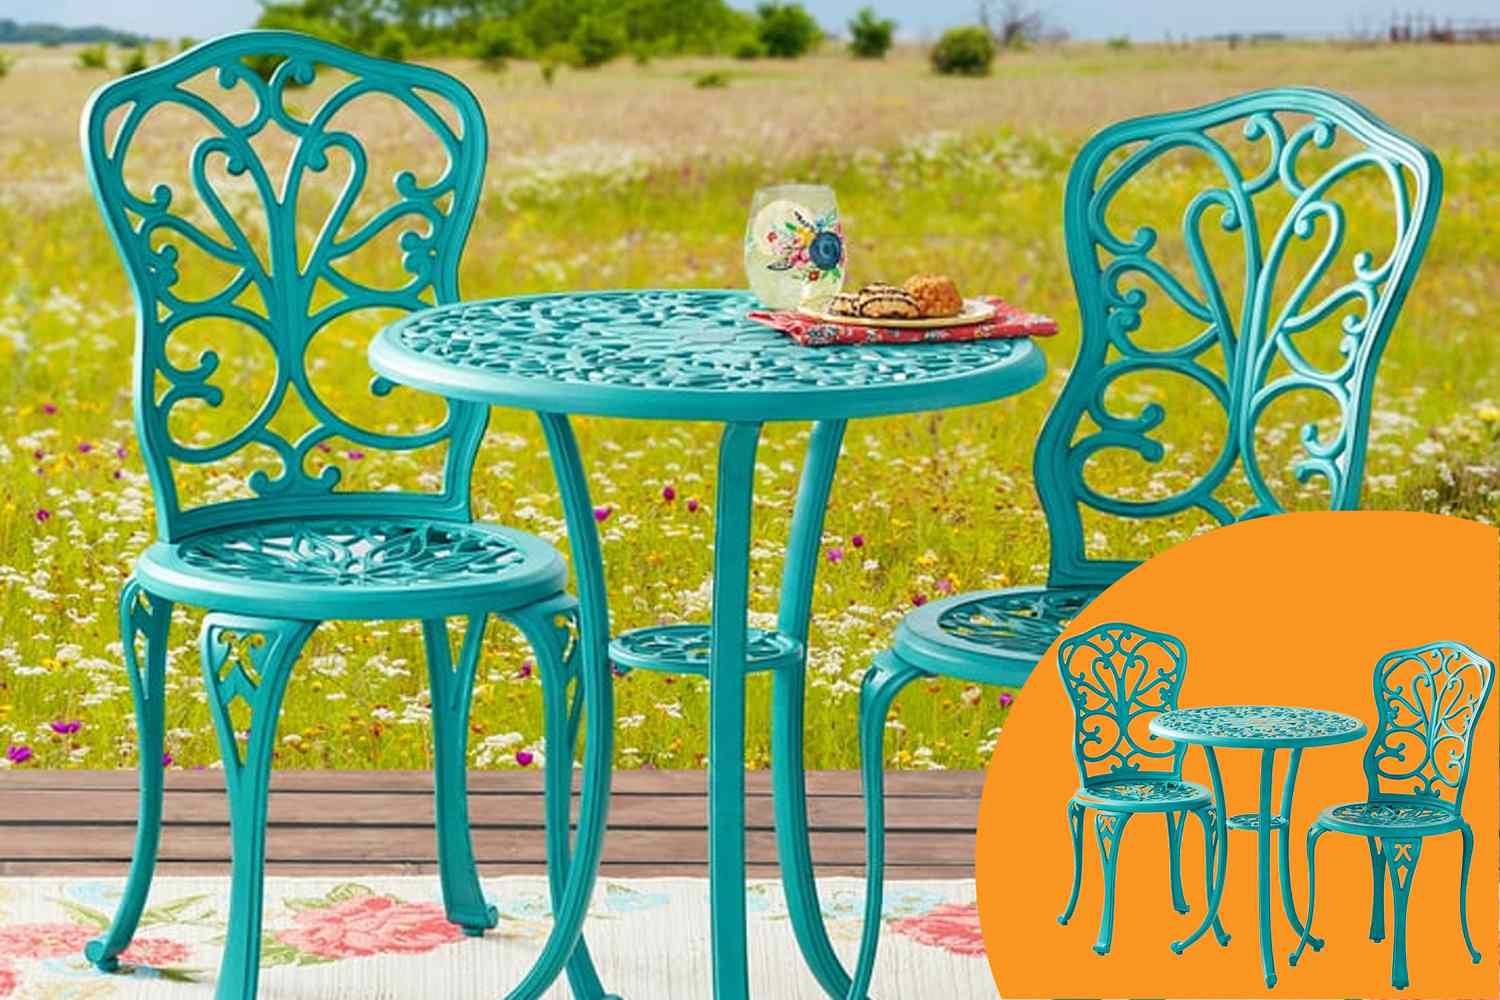 My Bistro Set from The Pioneer Woman’s Patio Furniture Line Survived an Iowa Winter [Video]